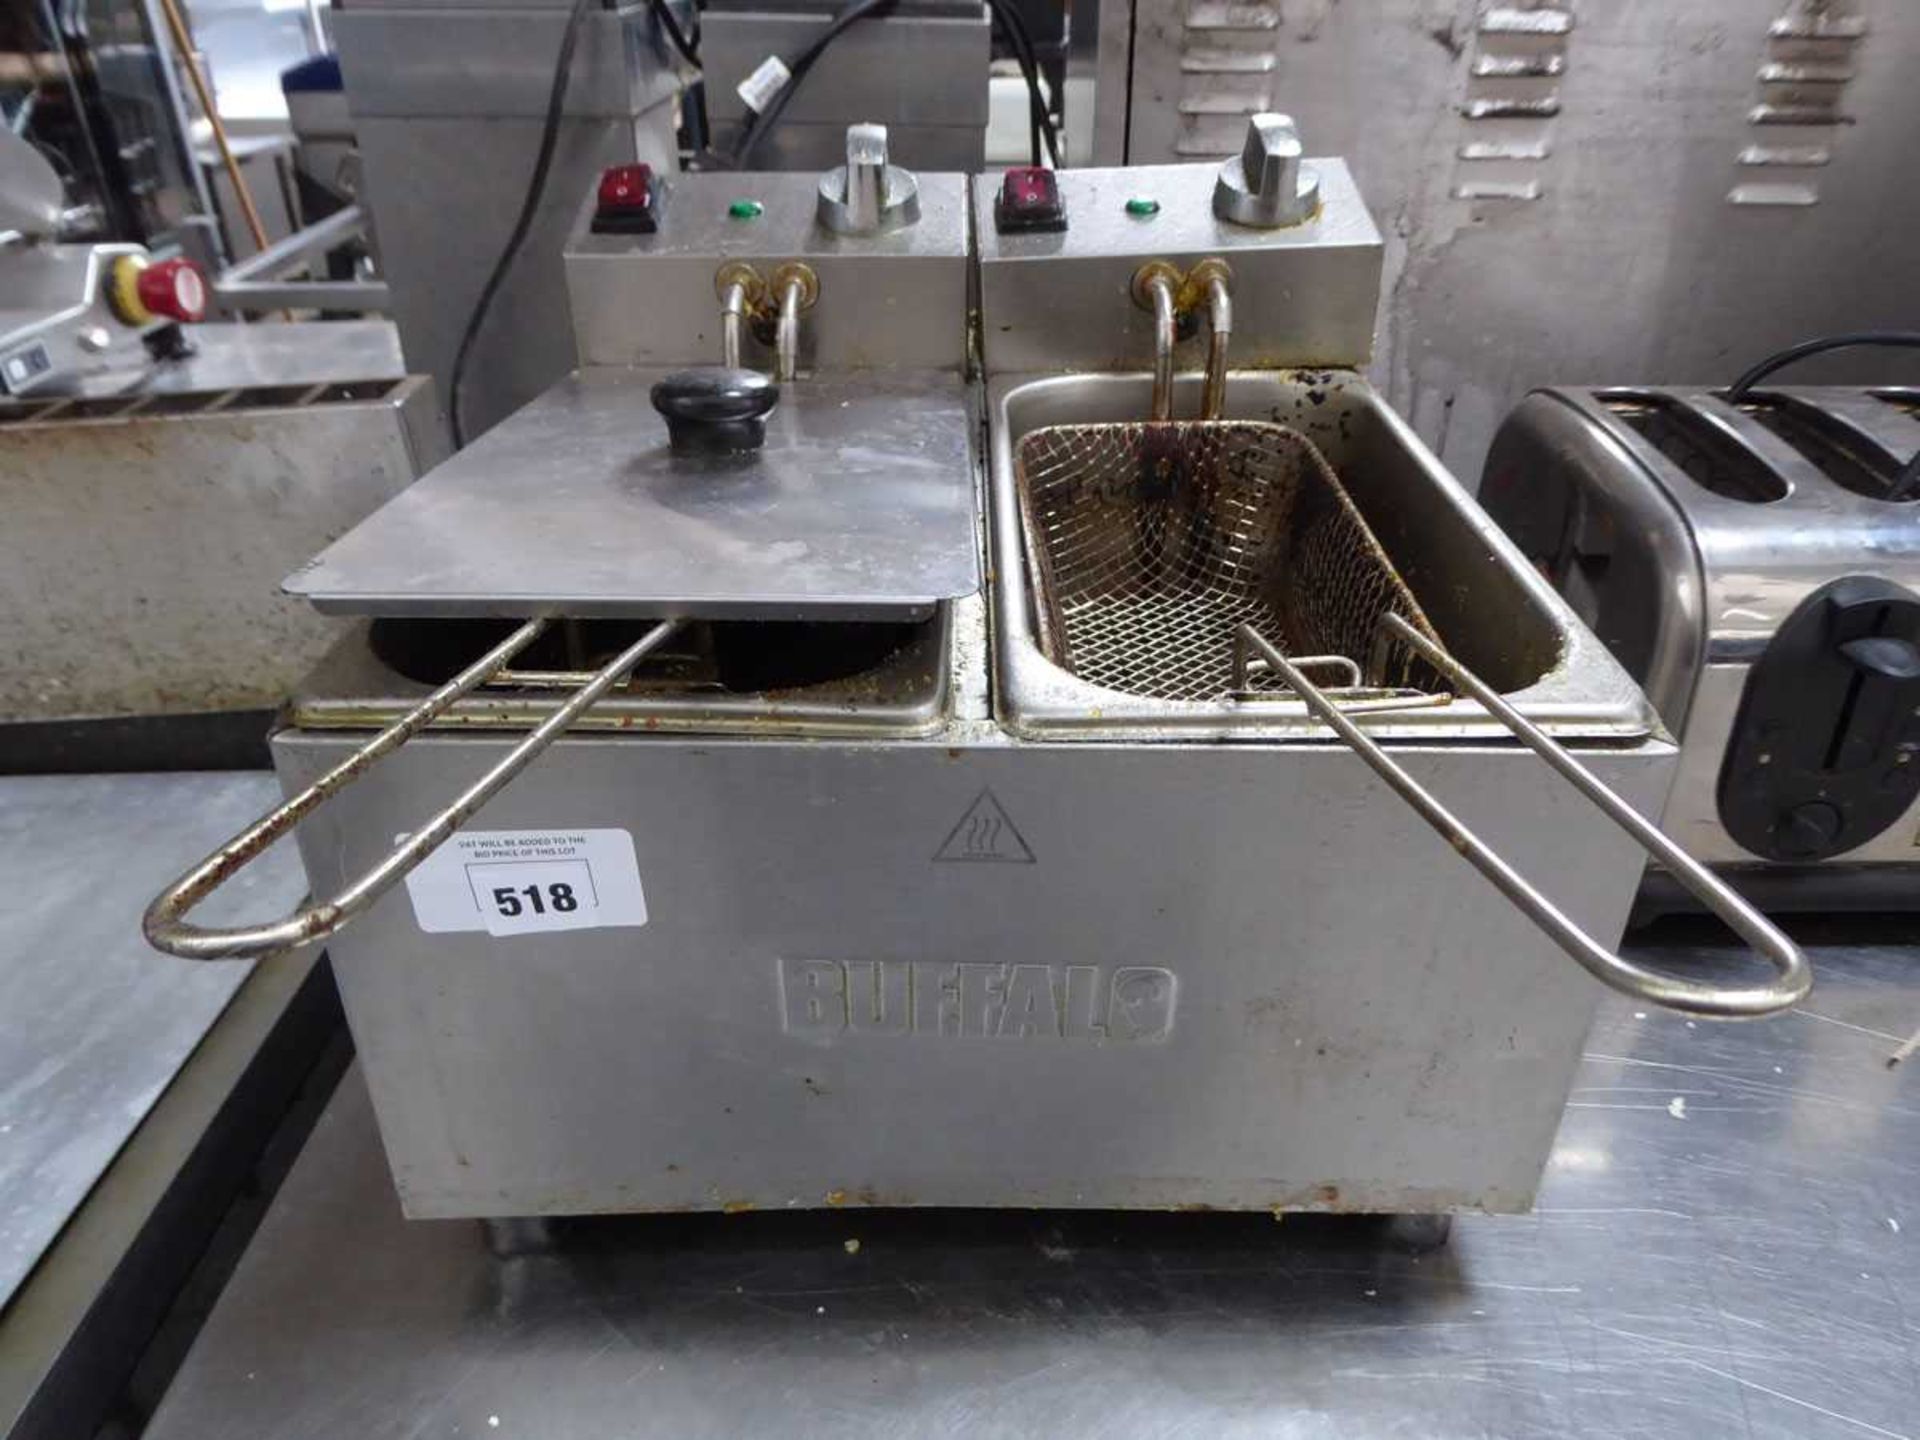 +VAT 36cm electric 2 well fryer with 2 baskets